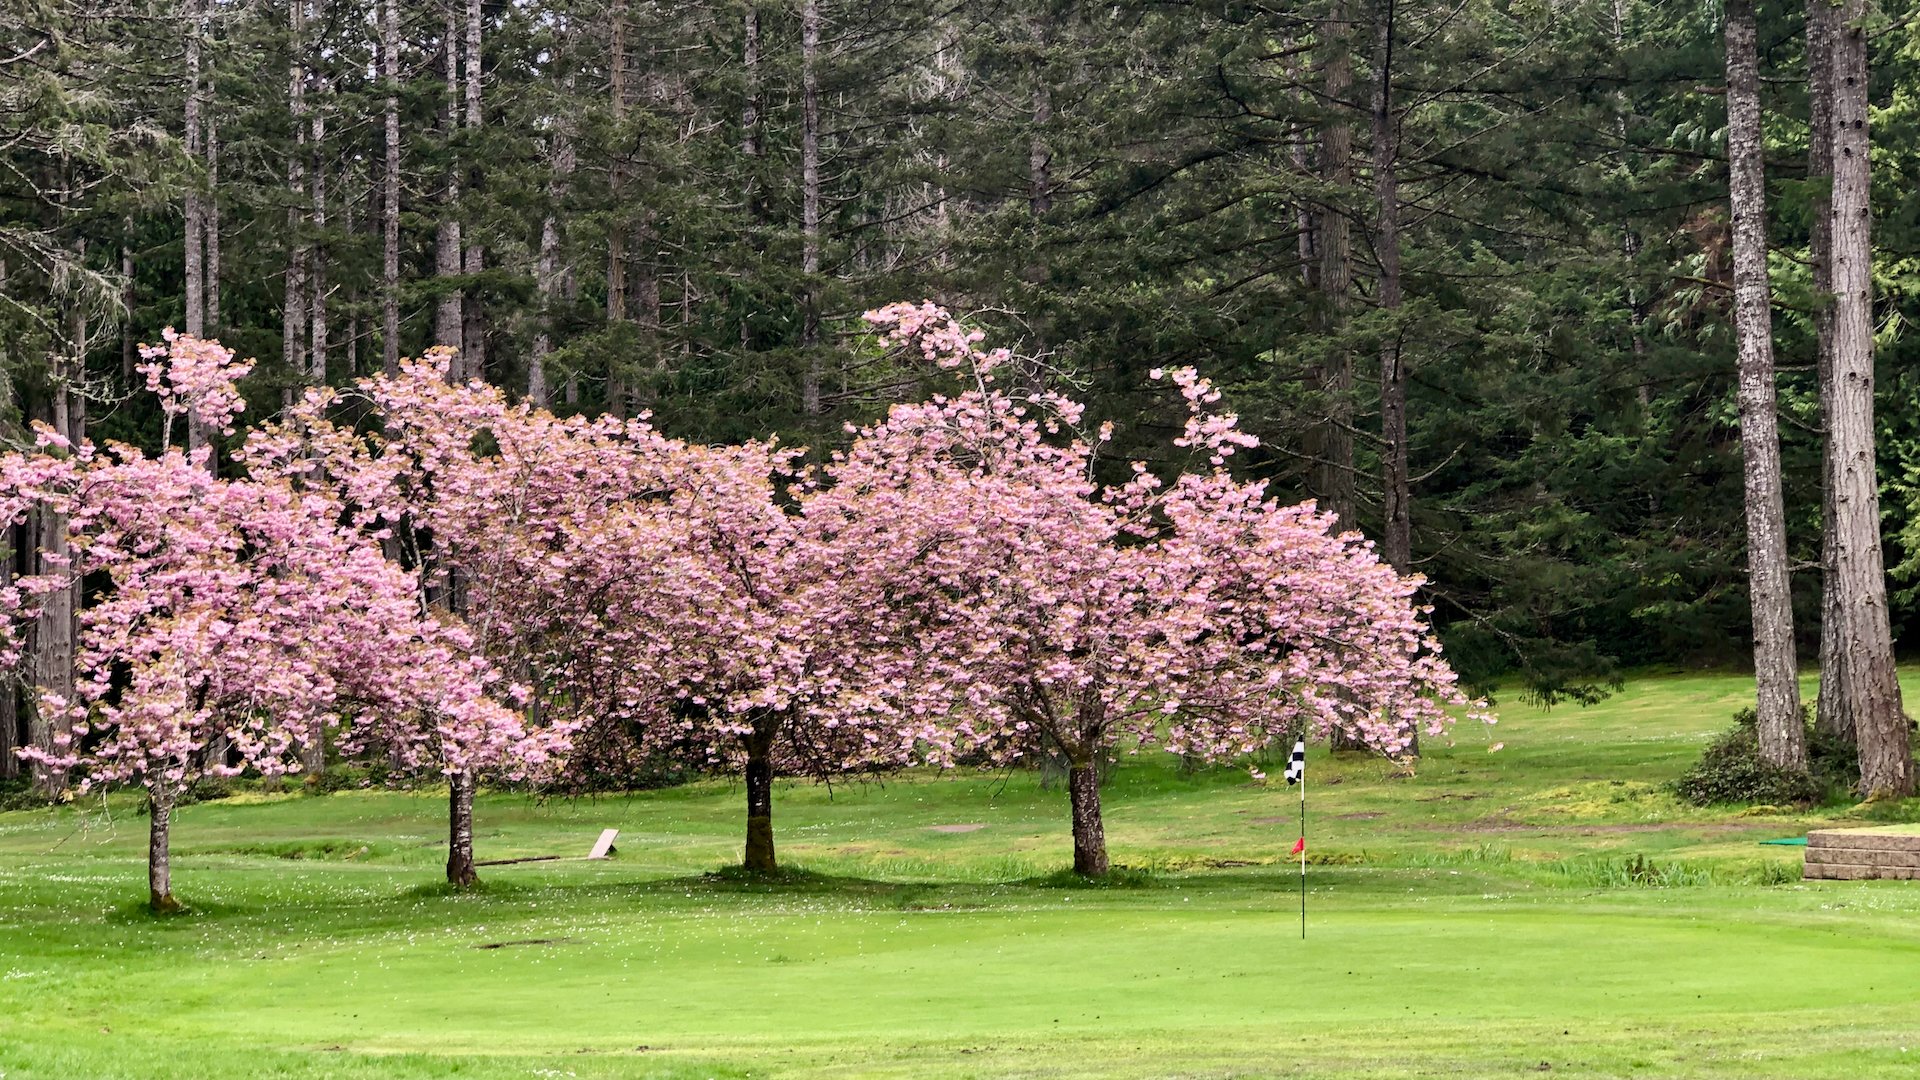  The cherry blossoms are still in bloom behind the green at the first hole. It’s a nice start to the round. 